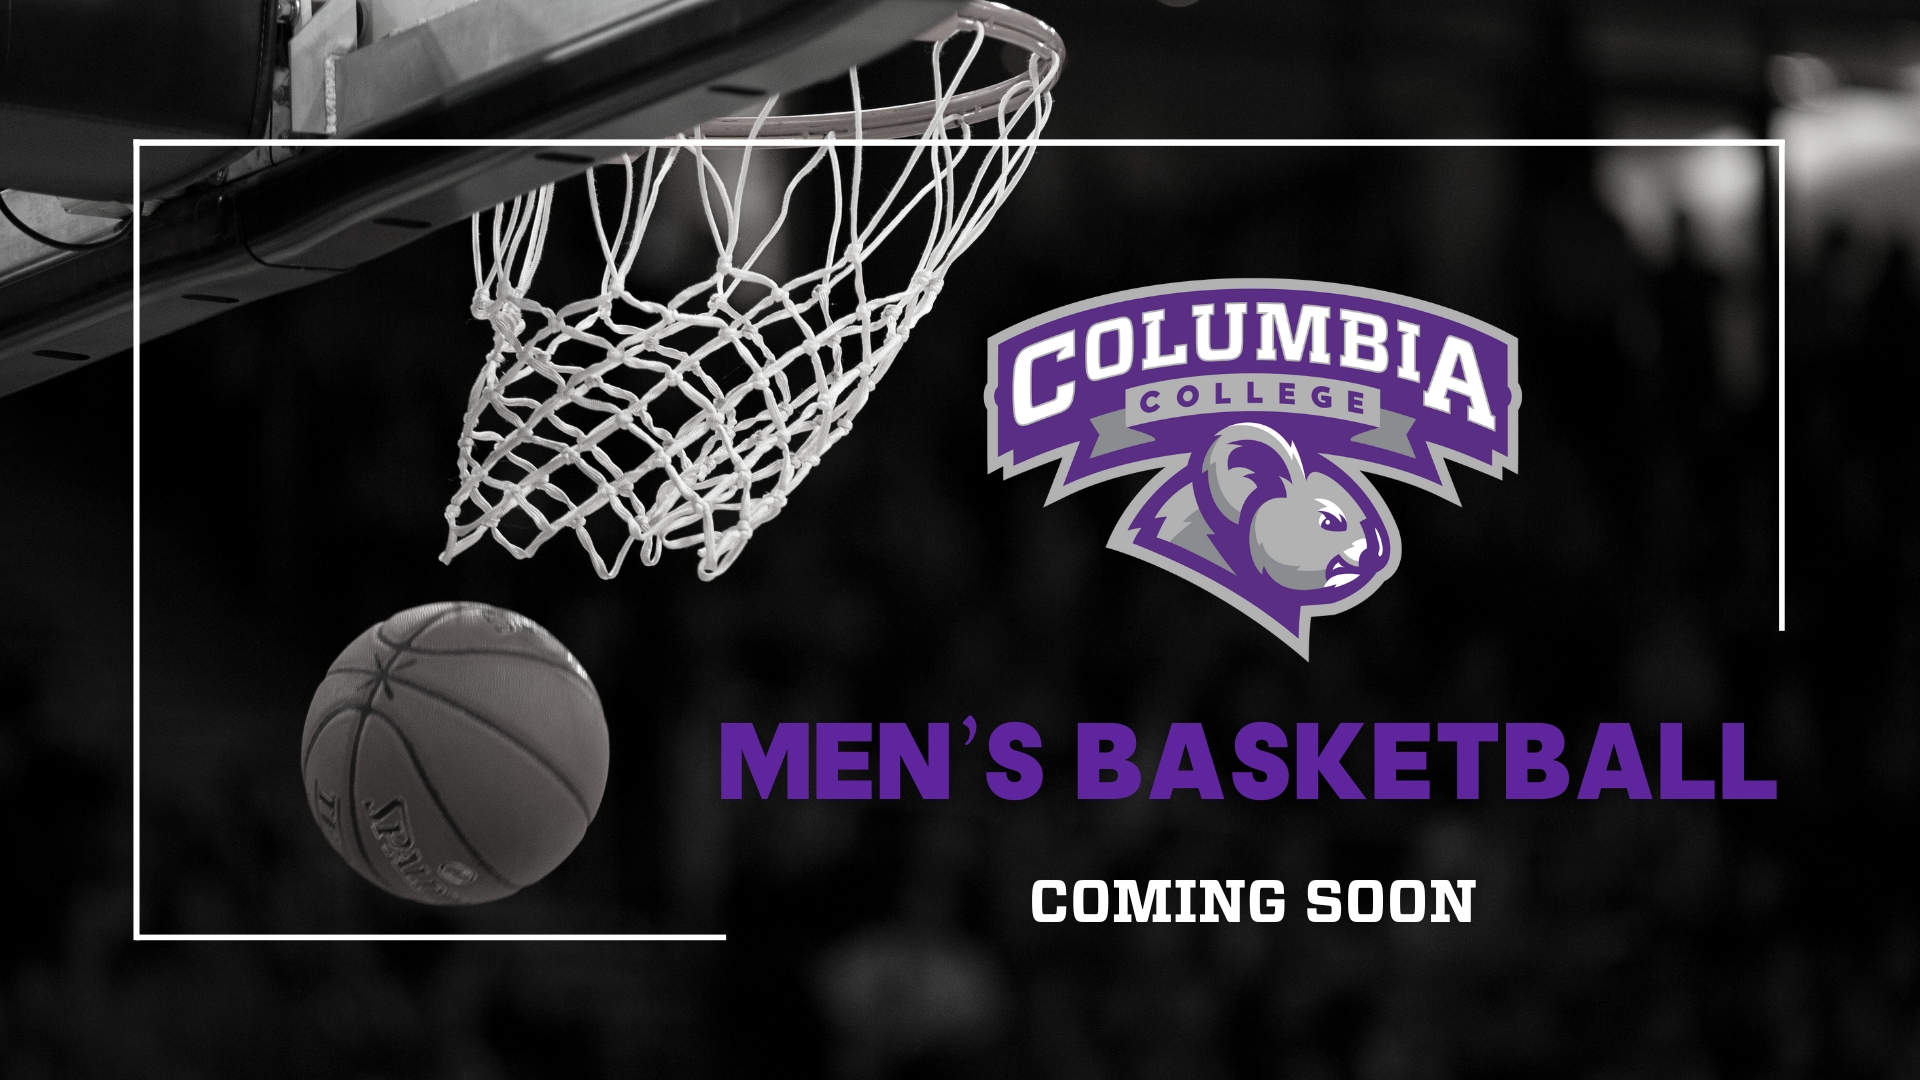 Men&rsquo;s Basketball Added to Columbia College Athletics